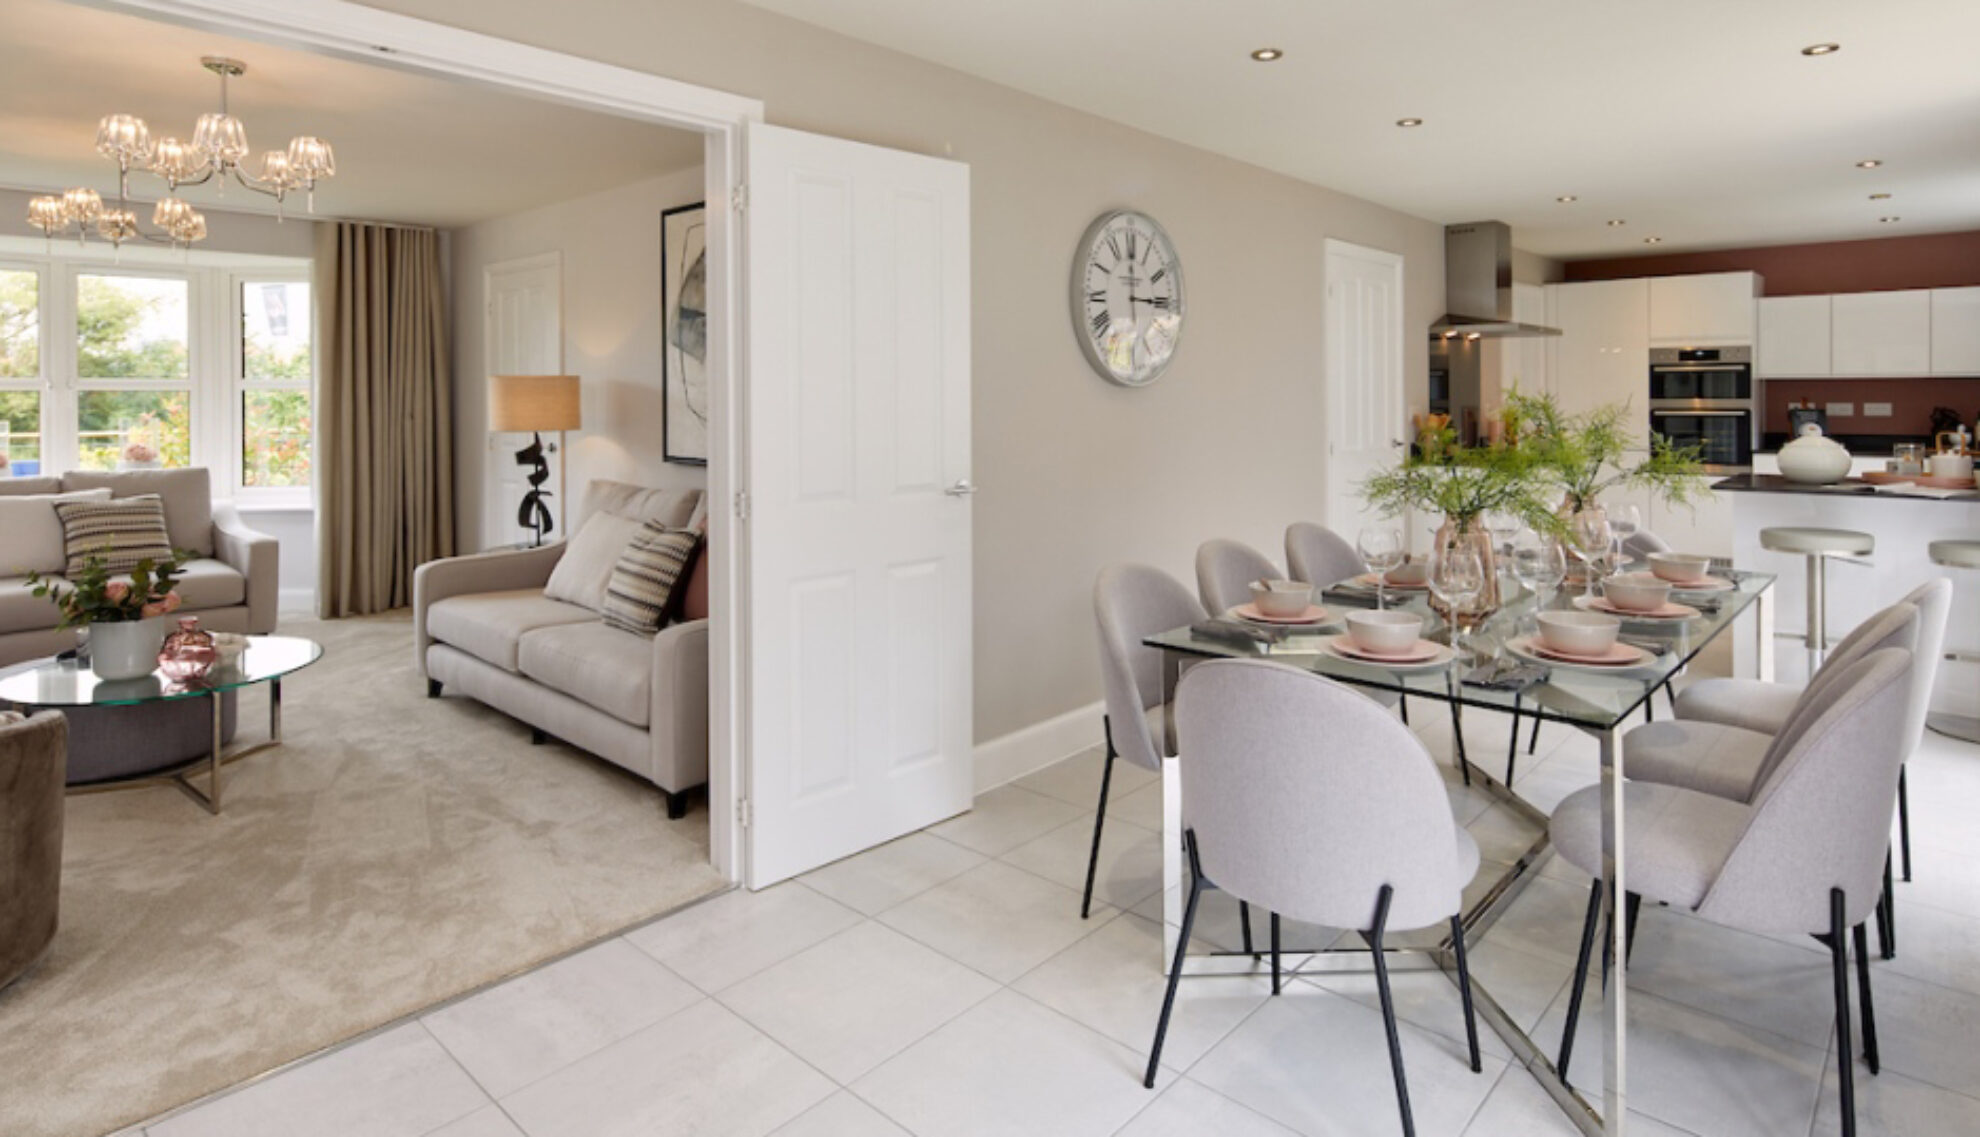 New build homes for sale in Yorkshire and the Humber